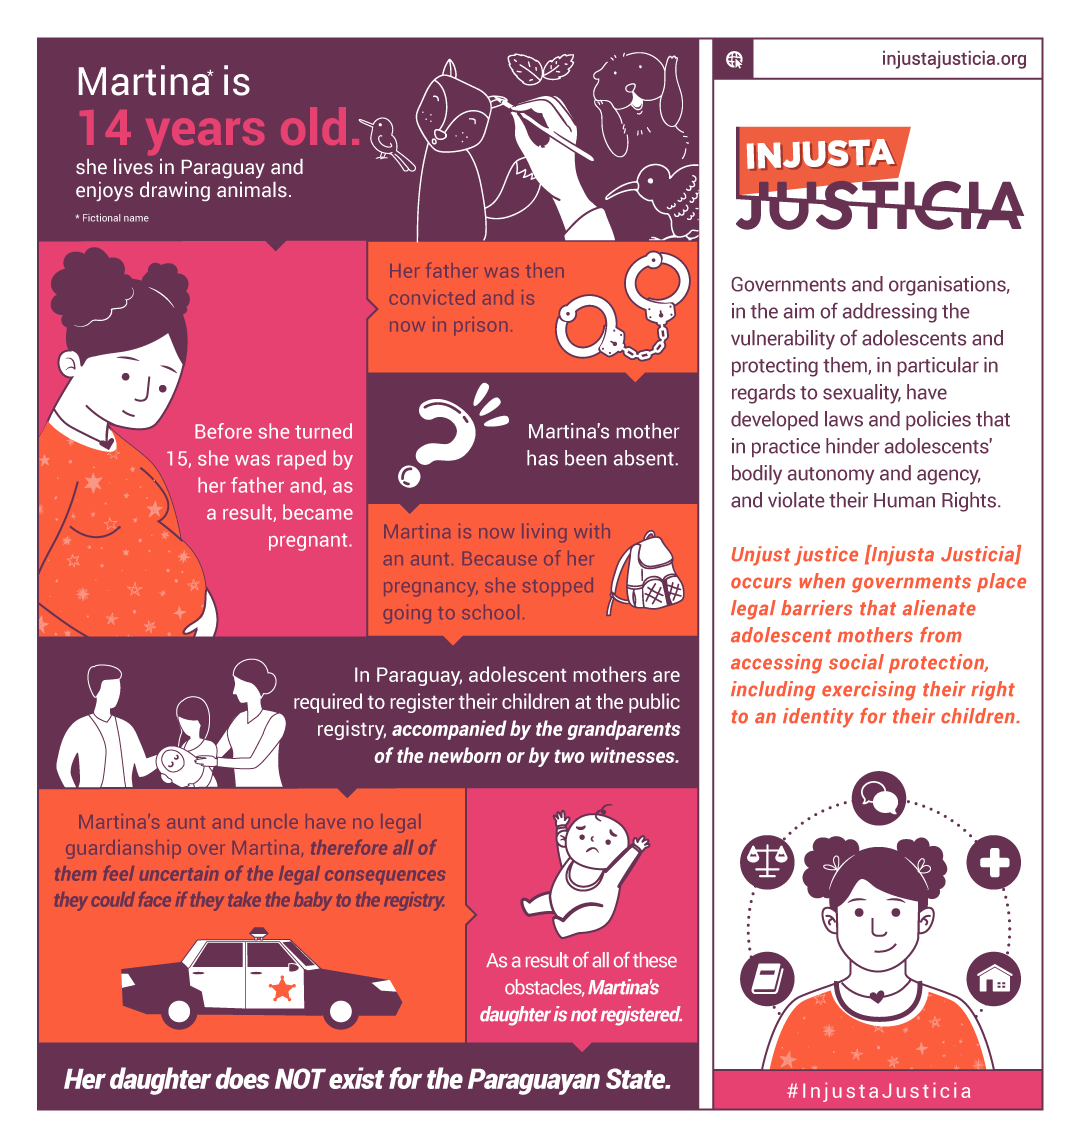 Infographic about Martina's case, which is explained below. Full description available for download.